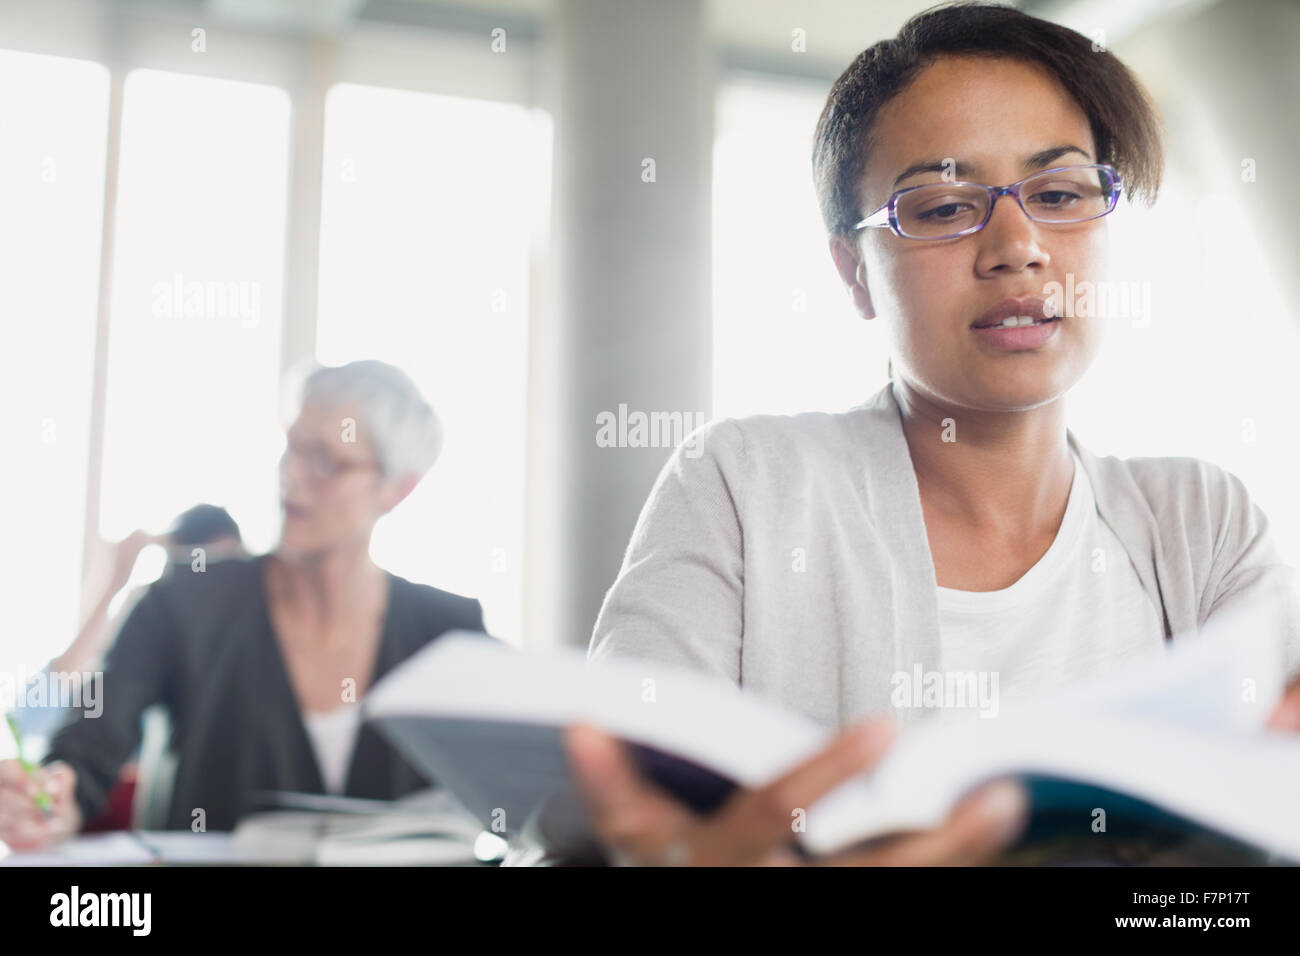 Serious woman reading book in adult education classroom Stock Photo